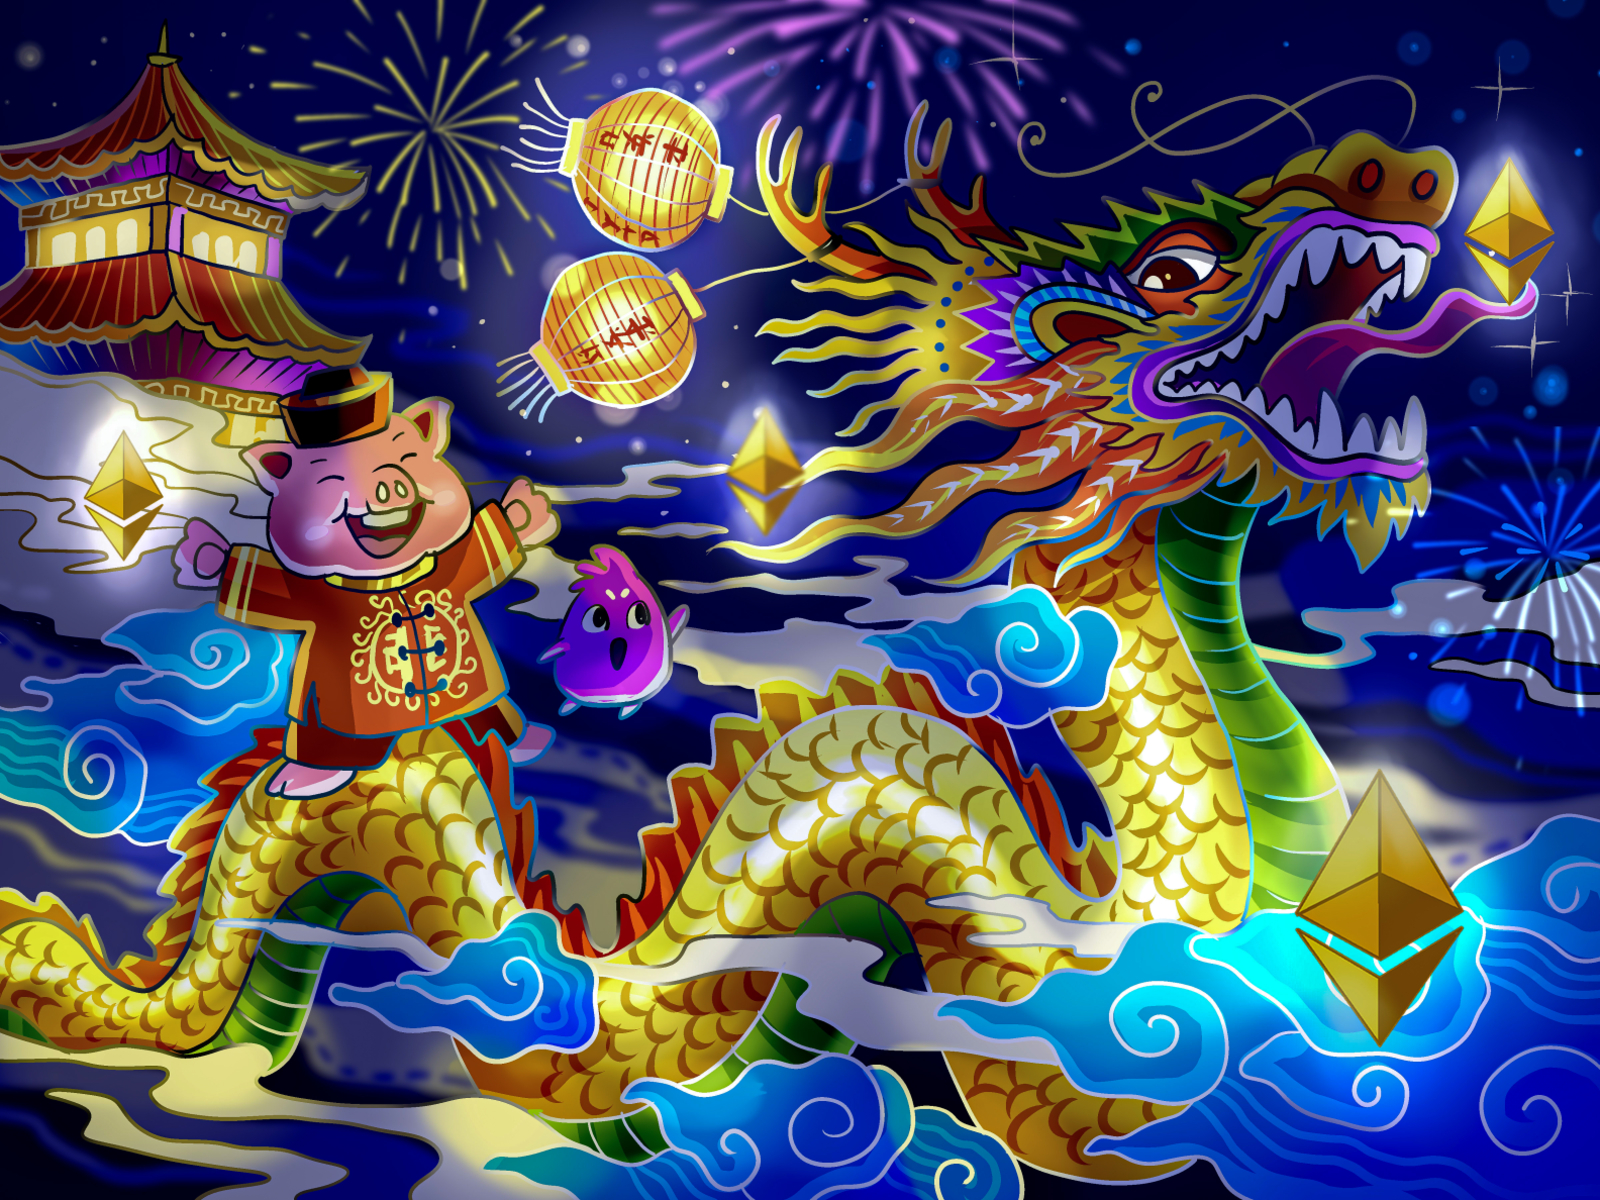 Etherium in Chinese artist character chinese collectible nft crypto crypto illustration digital art digital painting eth illustration lunar lunar year nft nft art nft artwork nft character nft illustration nft marketplace nft mint nft opensea